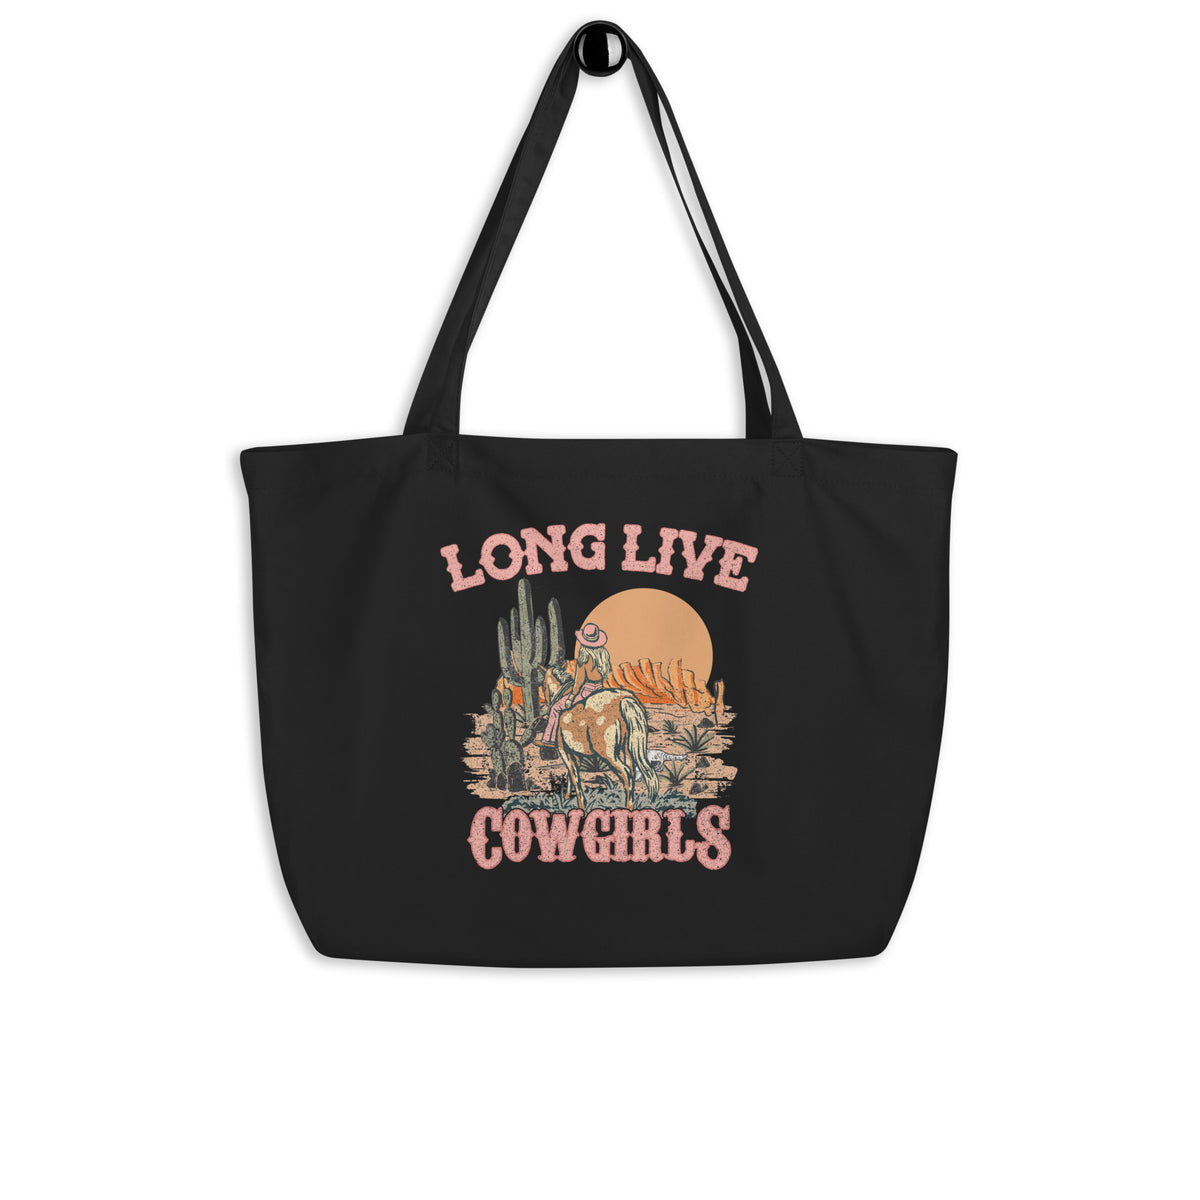 Long Live Cowgirls Eco Tote